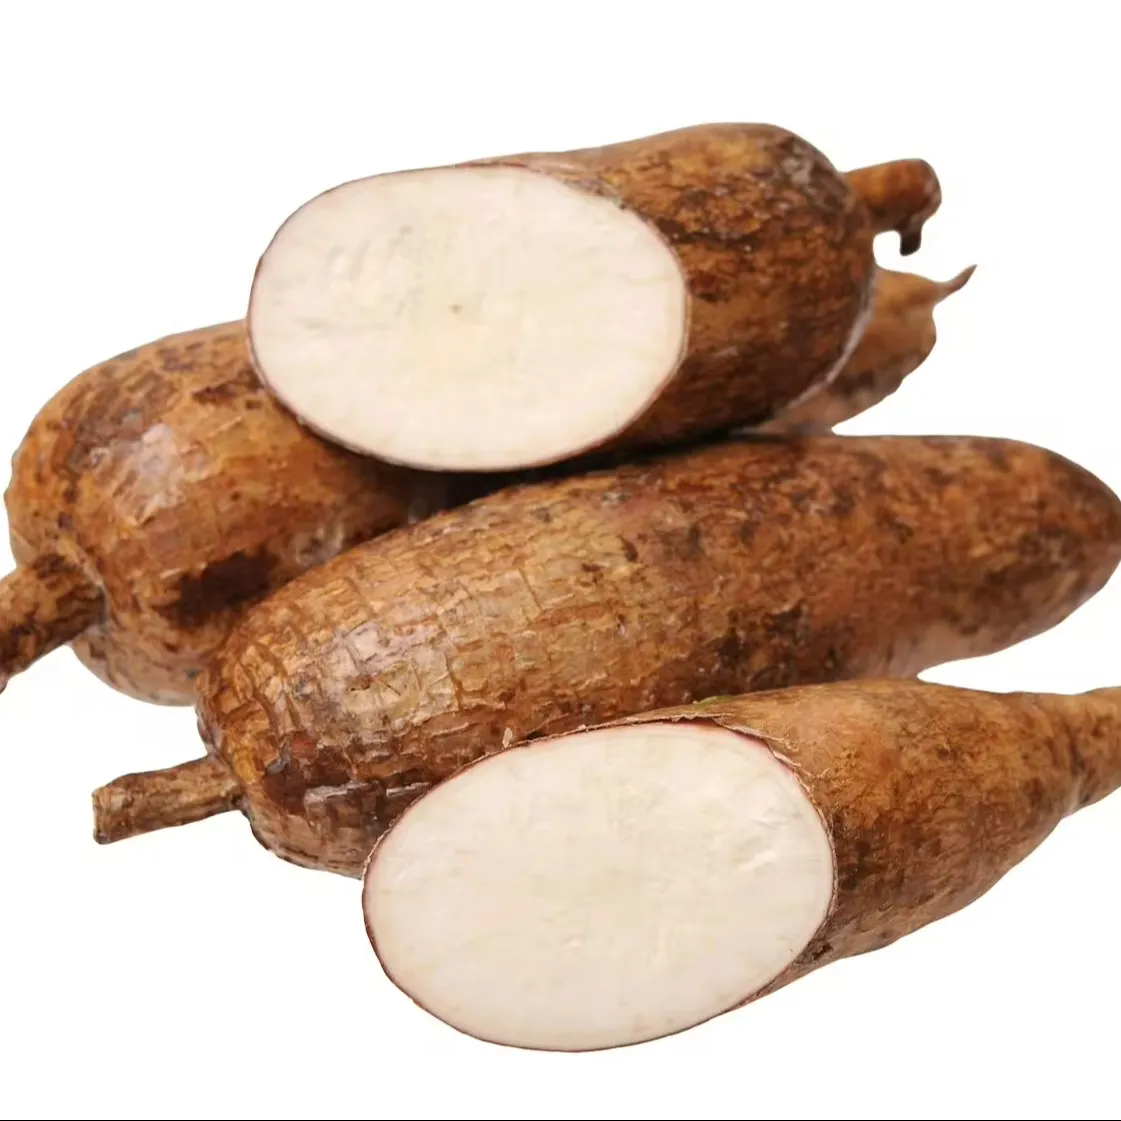 Dried Cassava from Vietnam Farm Competitive Price Cassava Agriculture Product from Dai Trung Company